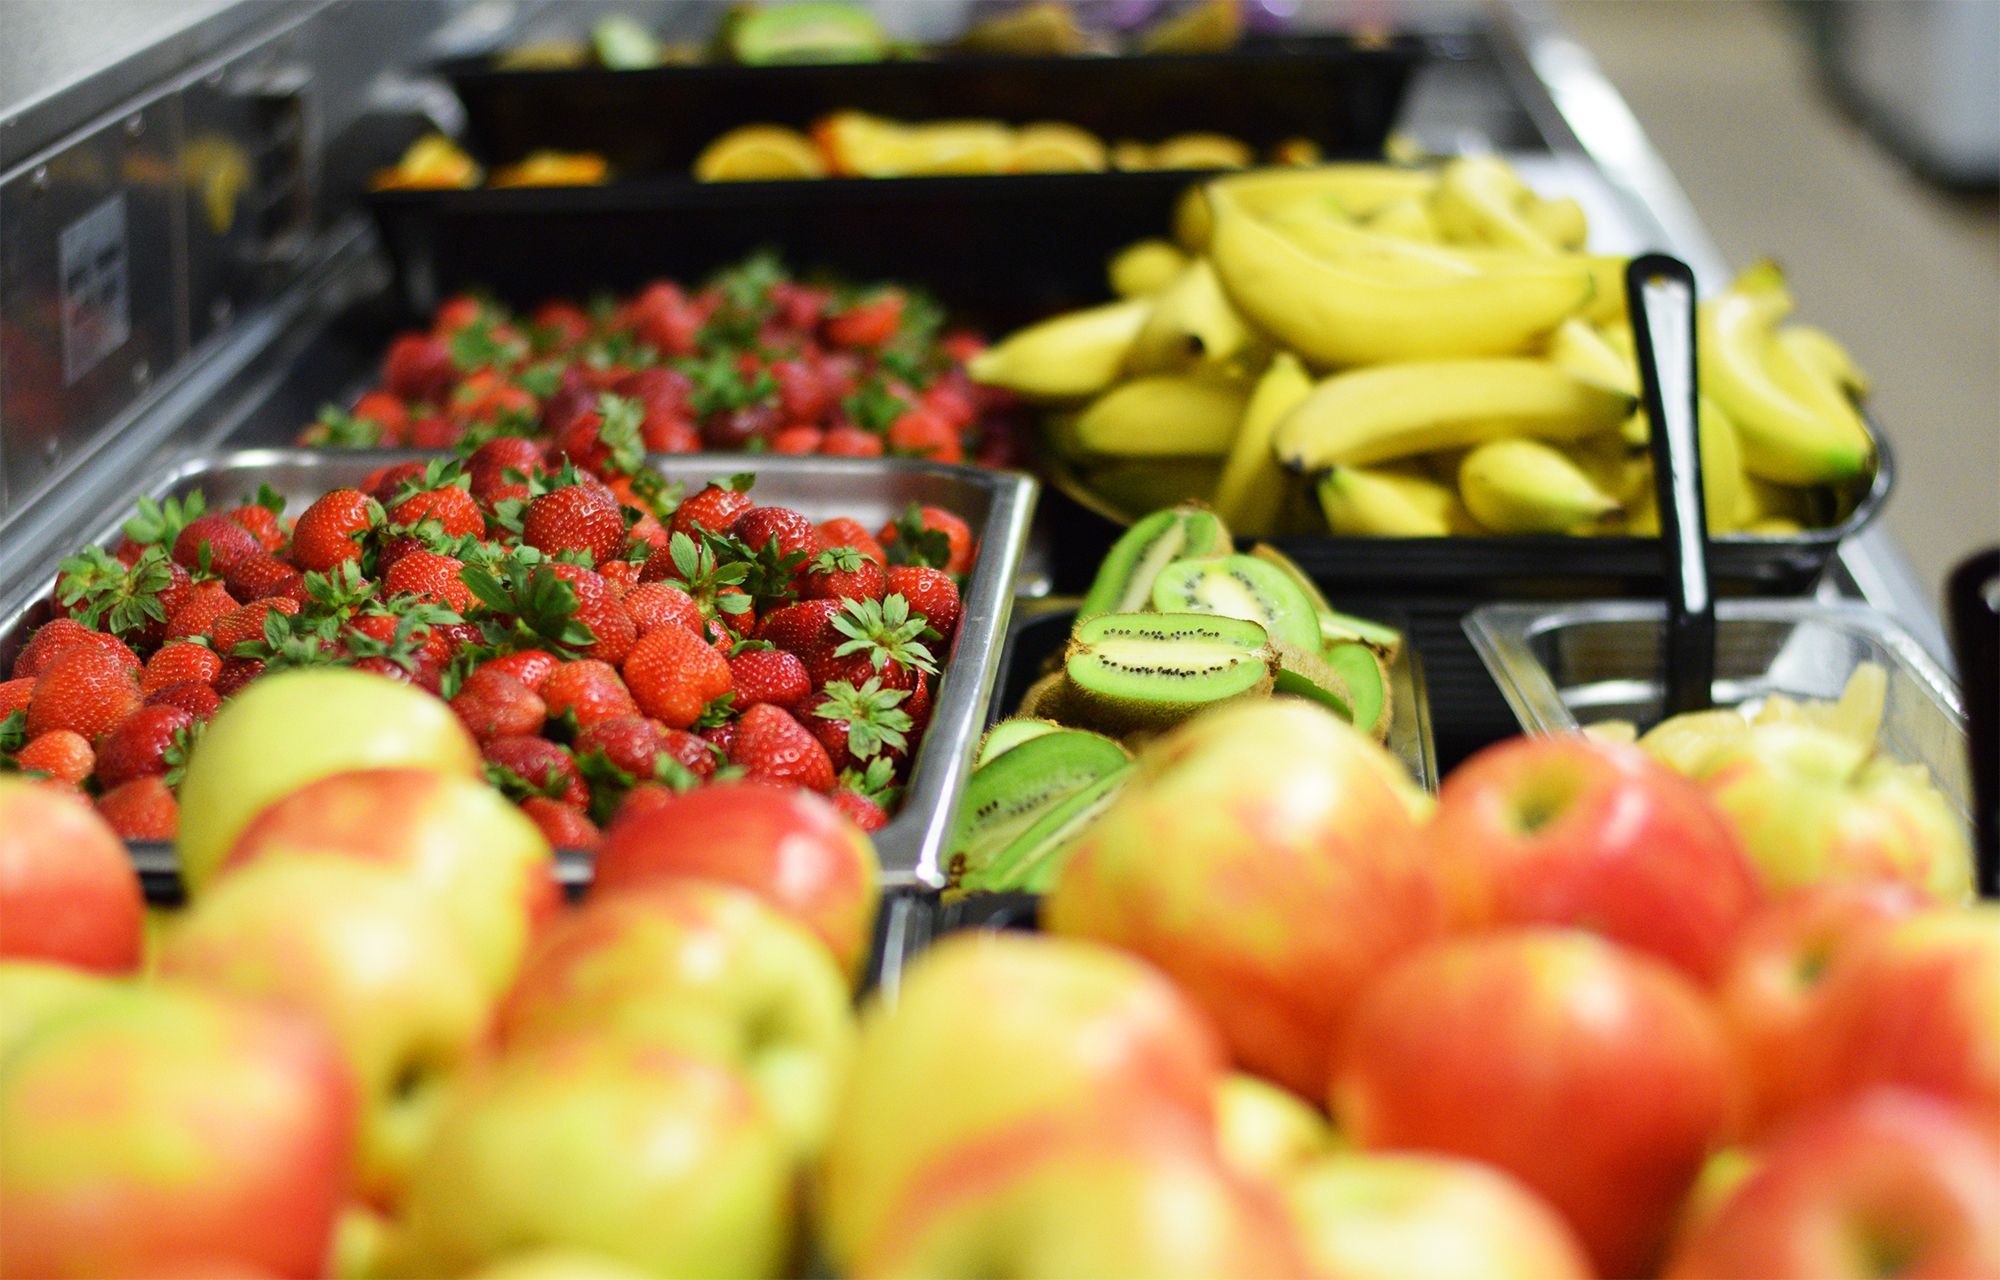 Prepared fresh fruit in the Viking Cafe, Holmen High School's cafeteria, awaits being transferred to the school salad bar, a popular choice among students and staff